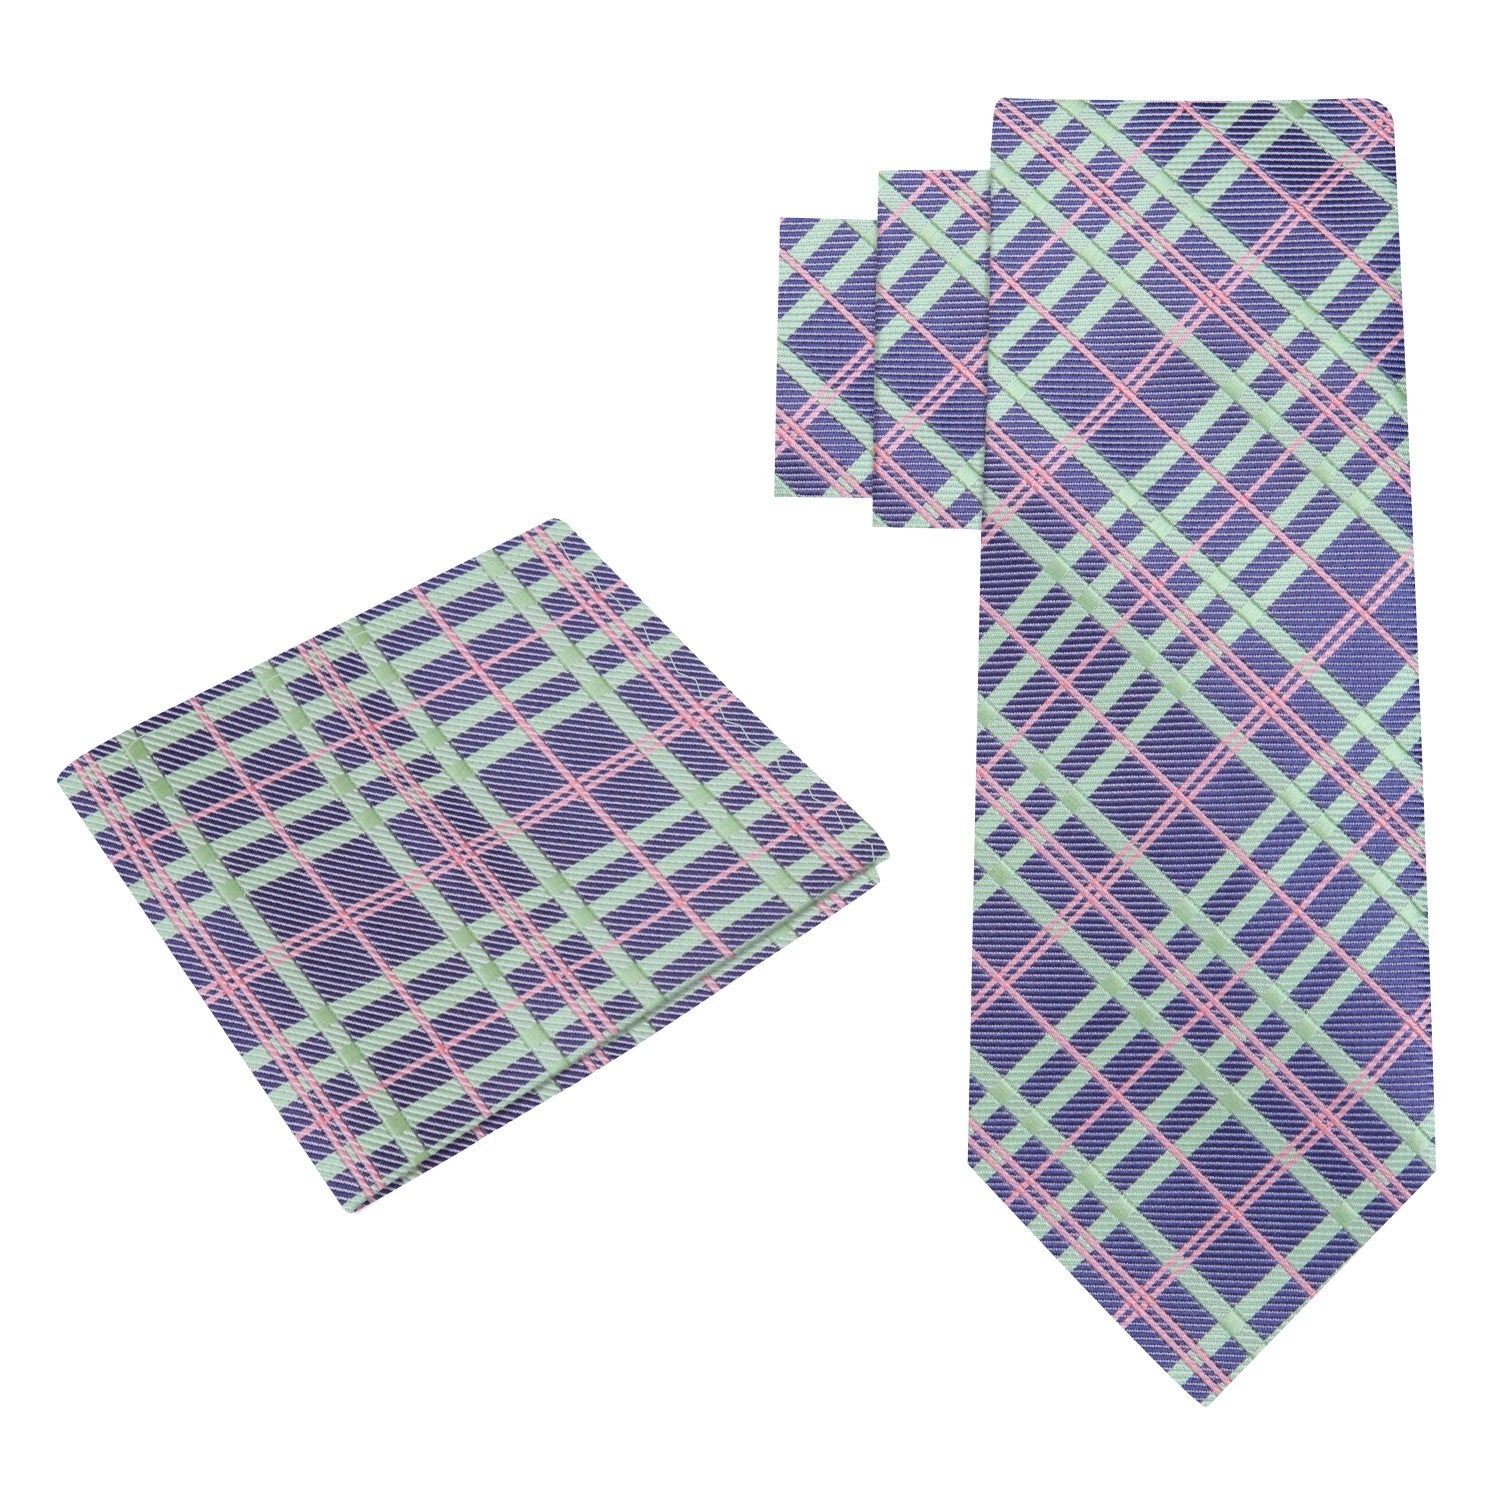 Alt View: Purple and Green Vendetta Plaid Tie and Pocket Square